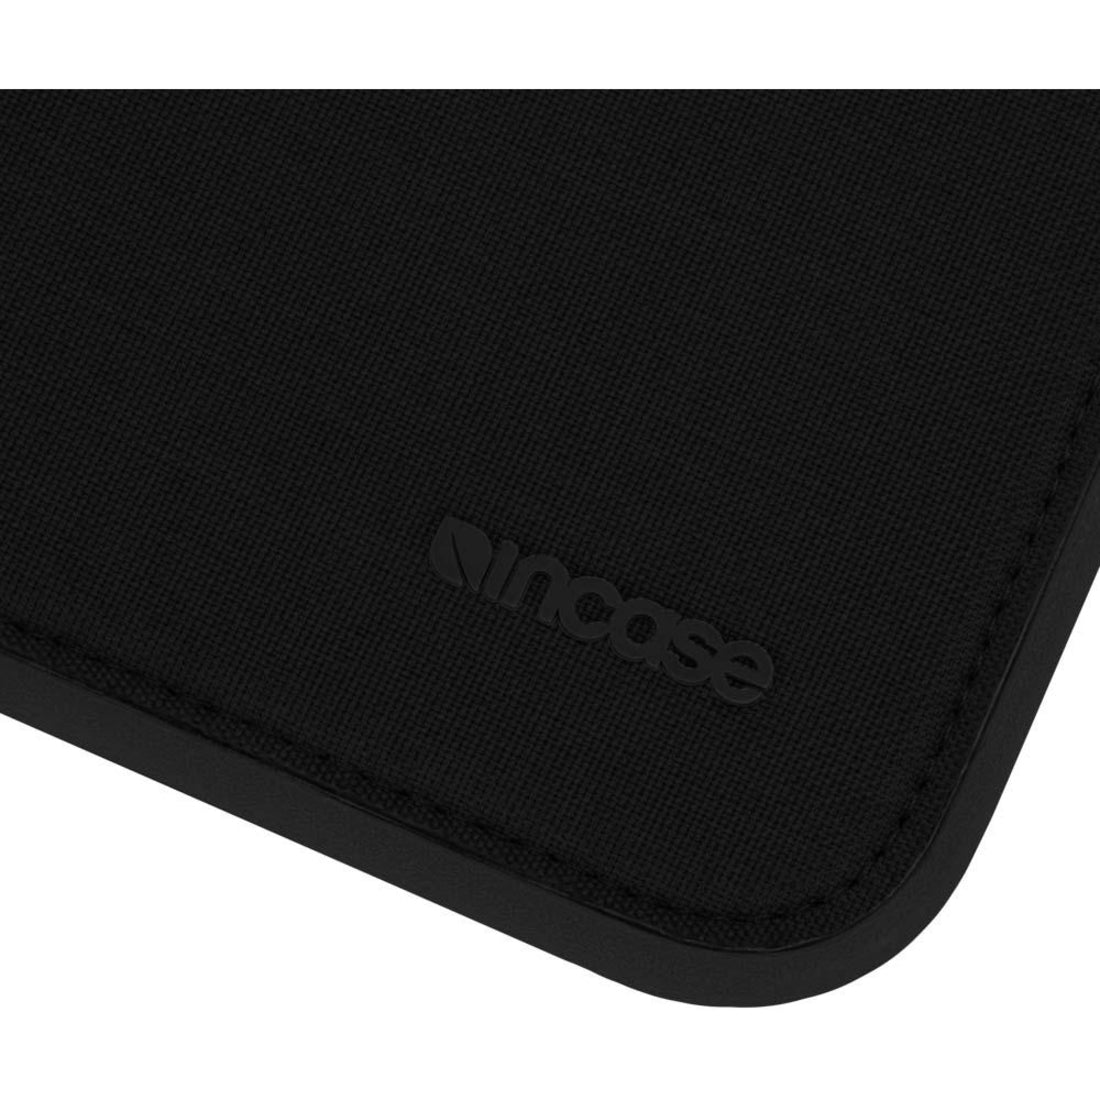 Incase ICON Carrying Case (Sleeve) for 13" Apple MacBook Air (Retina Display) MacBook Pro - Graphite